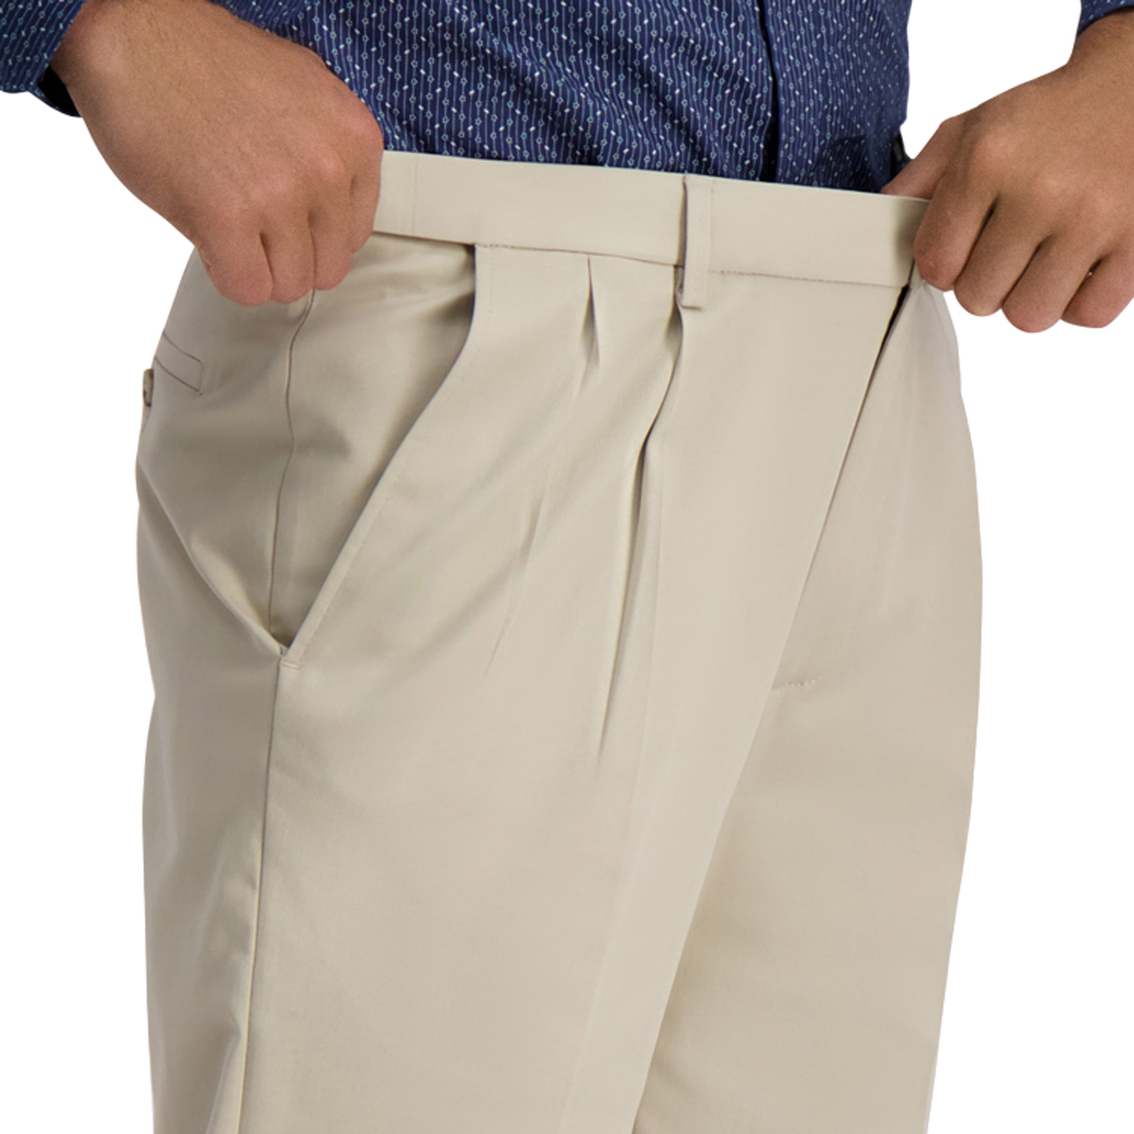 Haggar Iron Free Khaki Classic Fit Pleat Front Hidden Expandable Waistband Pants - Image 4 of 4